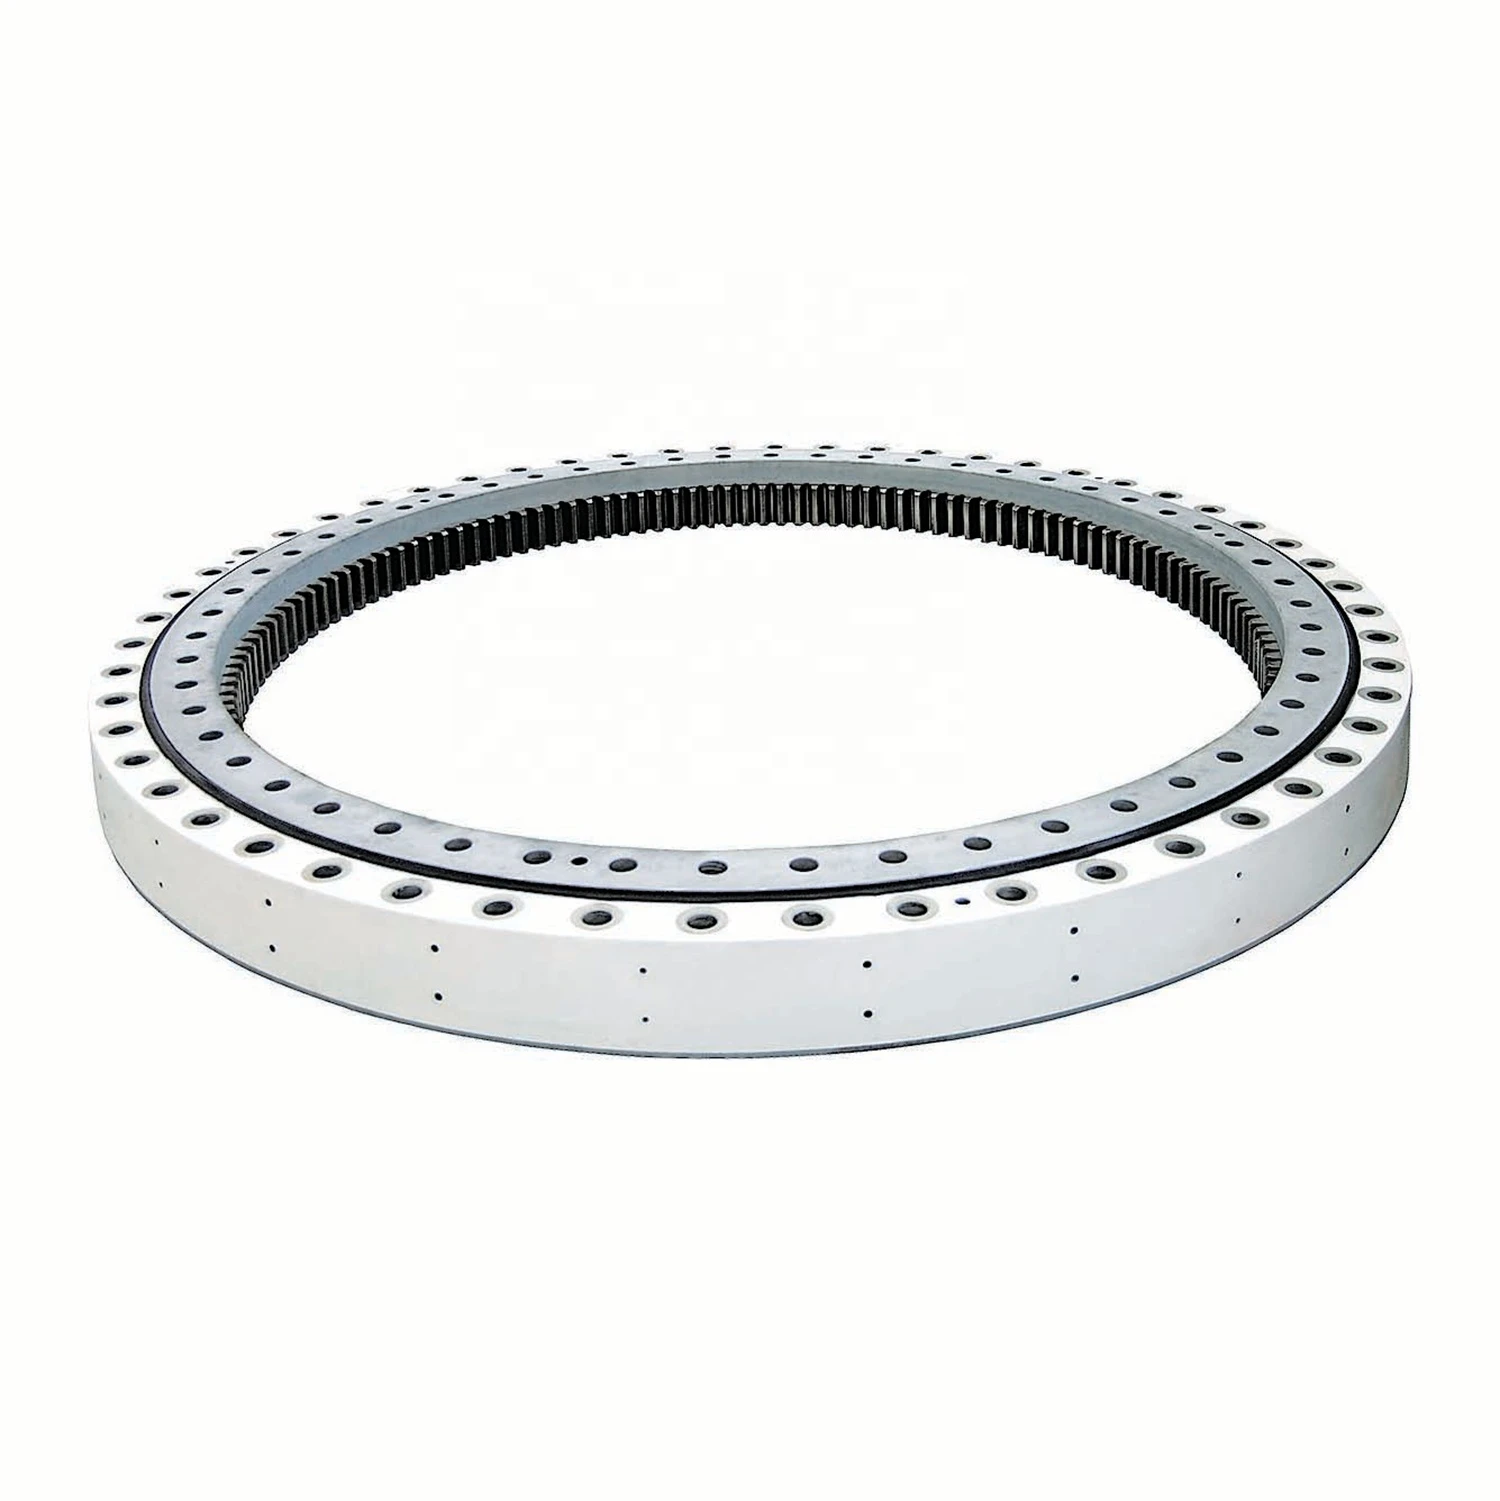 39 Inch Four-Point Contact 998x1242x100 mm Ball Slewing Ring Bearing with  No Gea | eBay